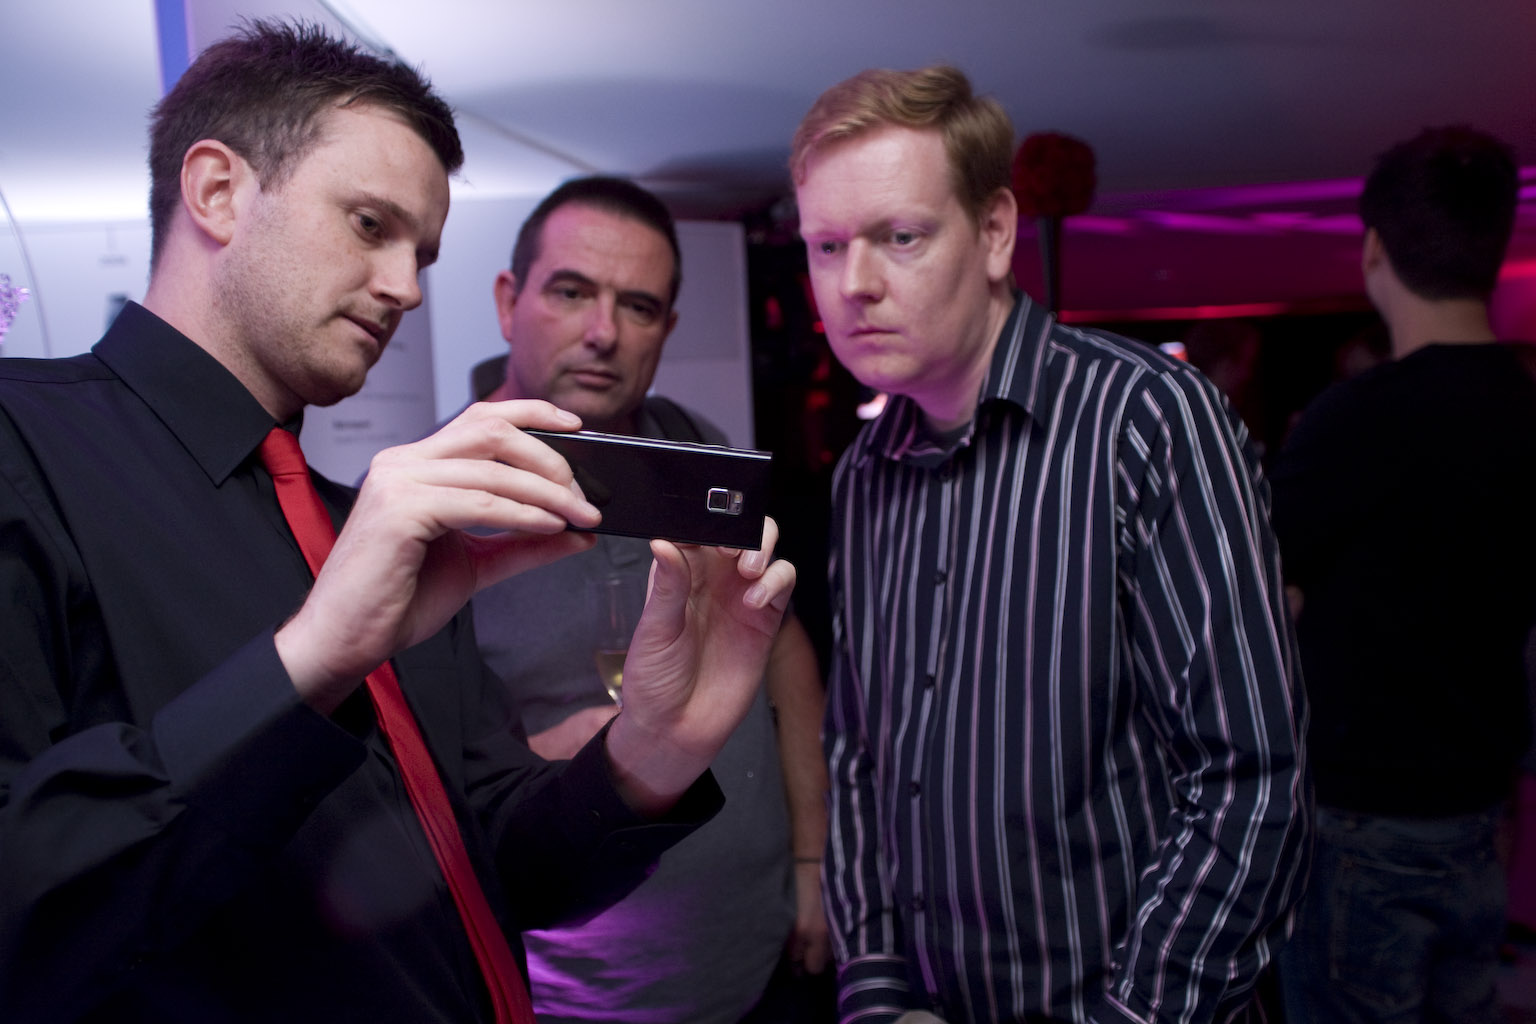 two men holding a phone are standing in a room